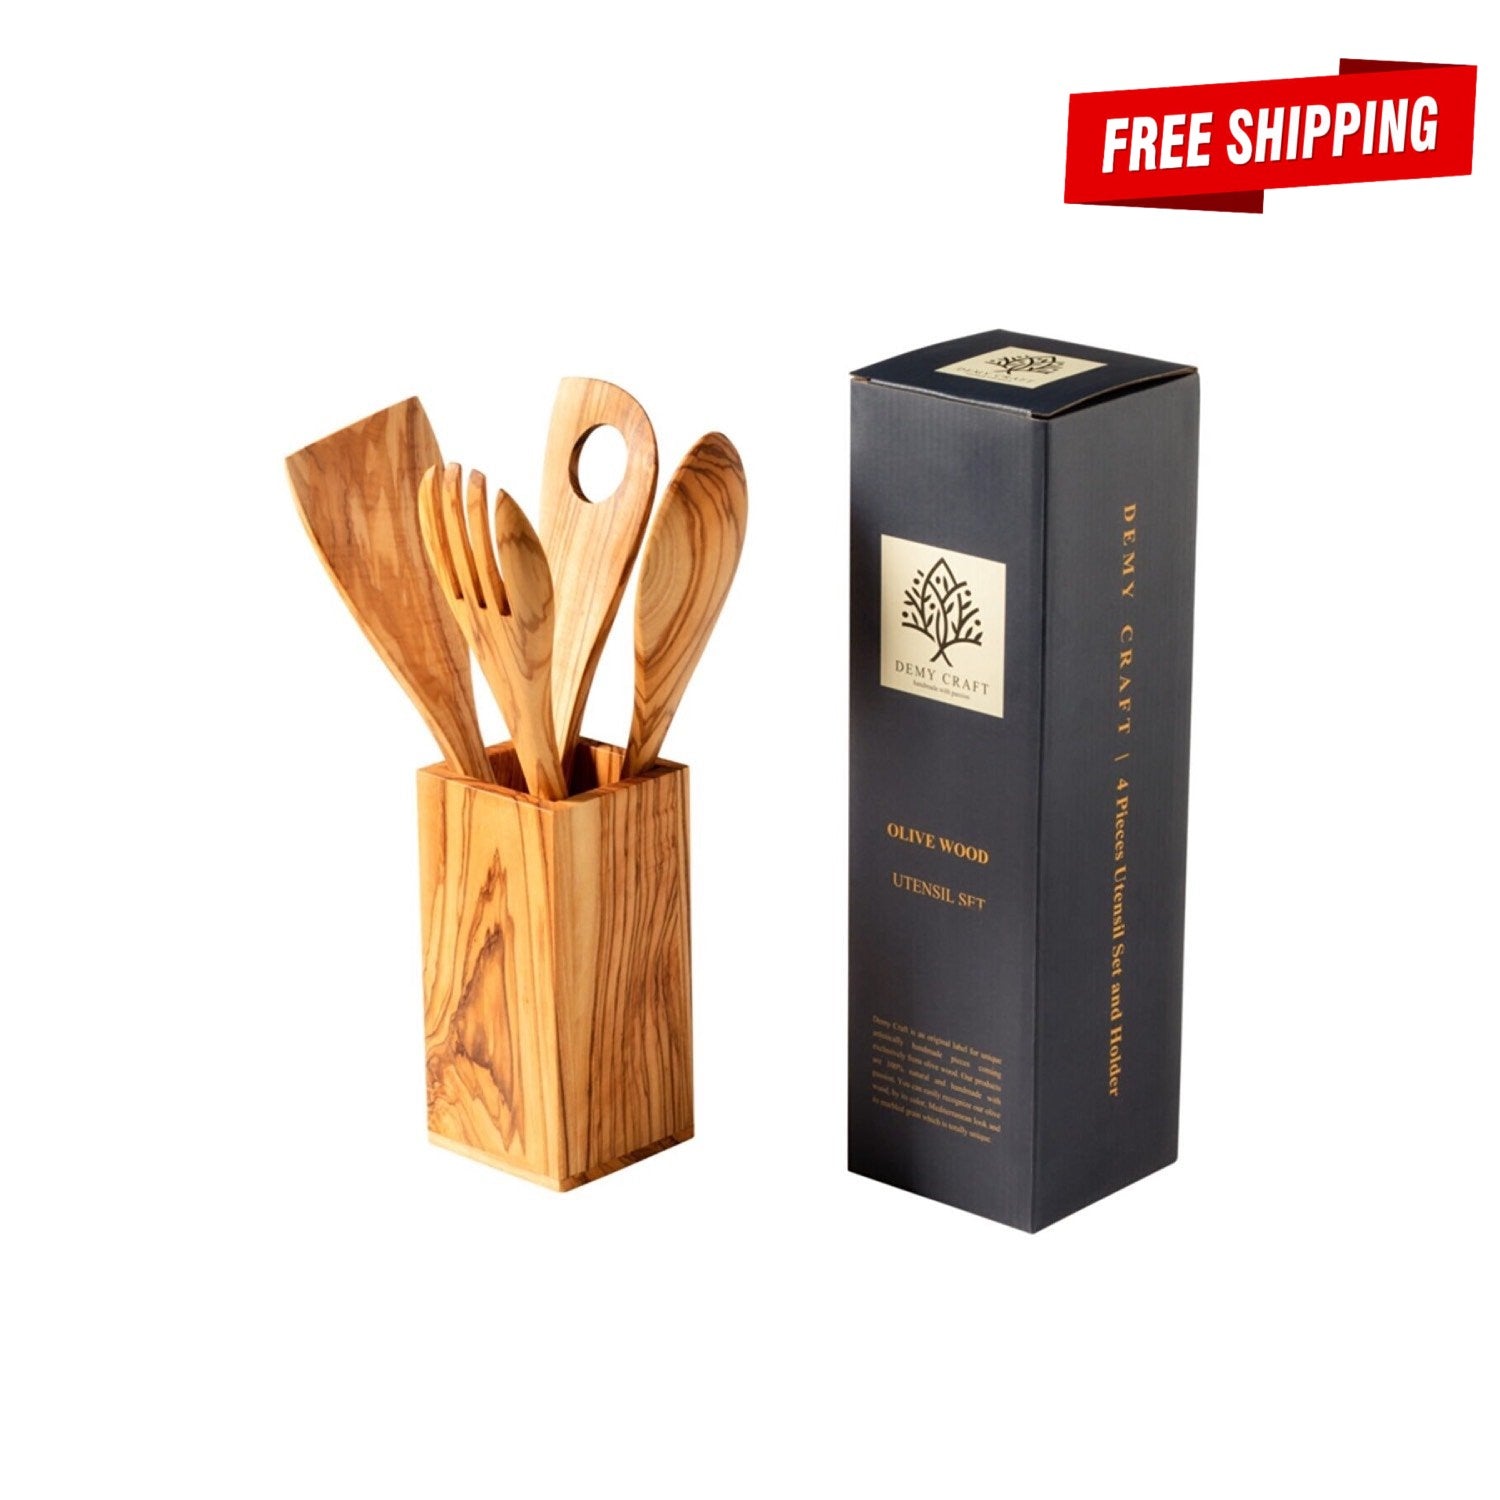  Kitchen Accessories with Gift Box, Wooden Spatula Set